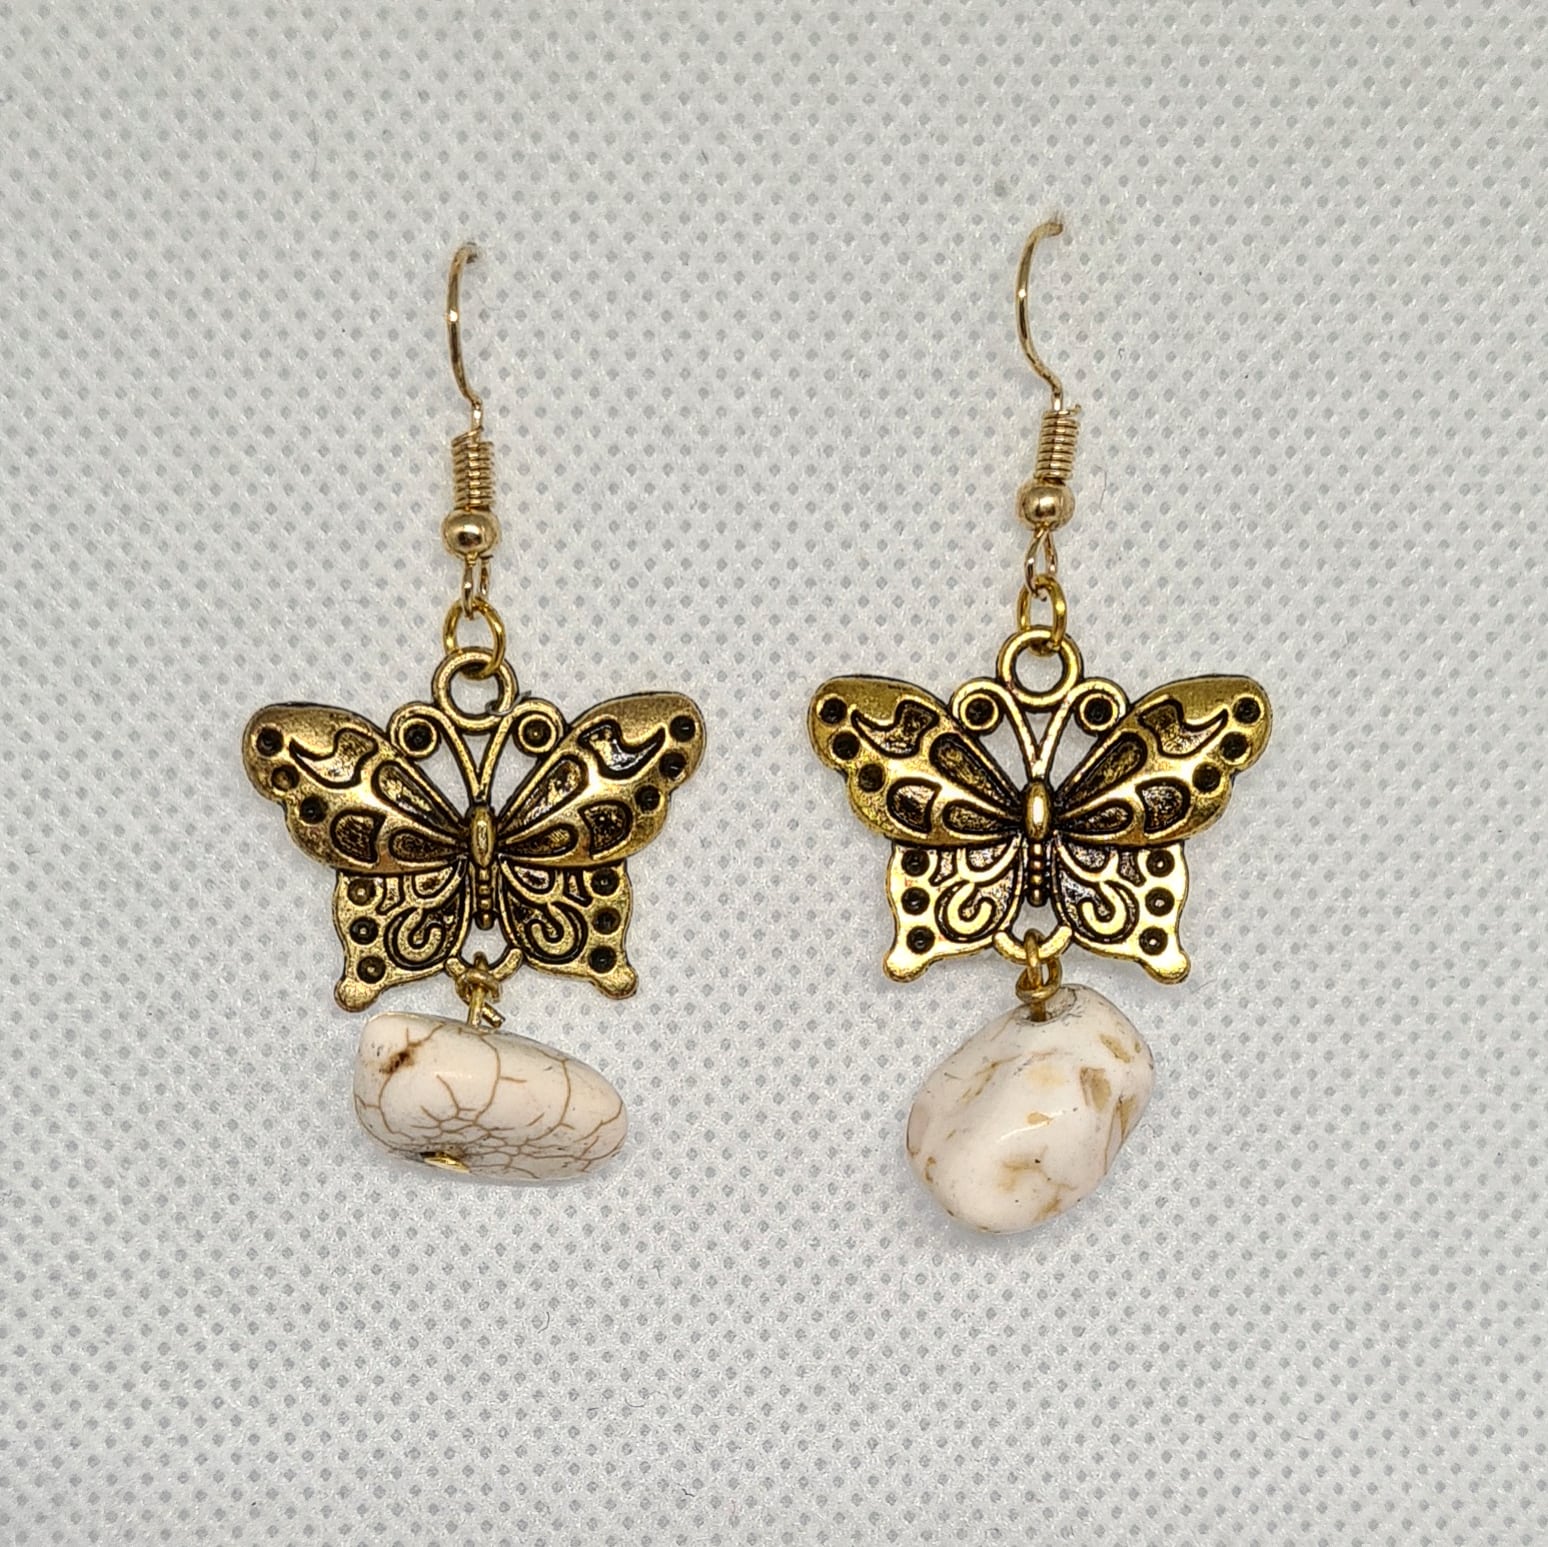 Flora butterfly earrings an exquisitely crafted dangle drops featuring shimmering details